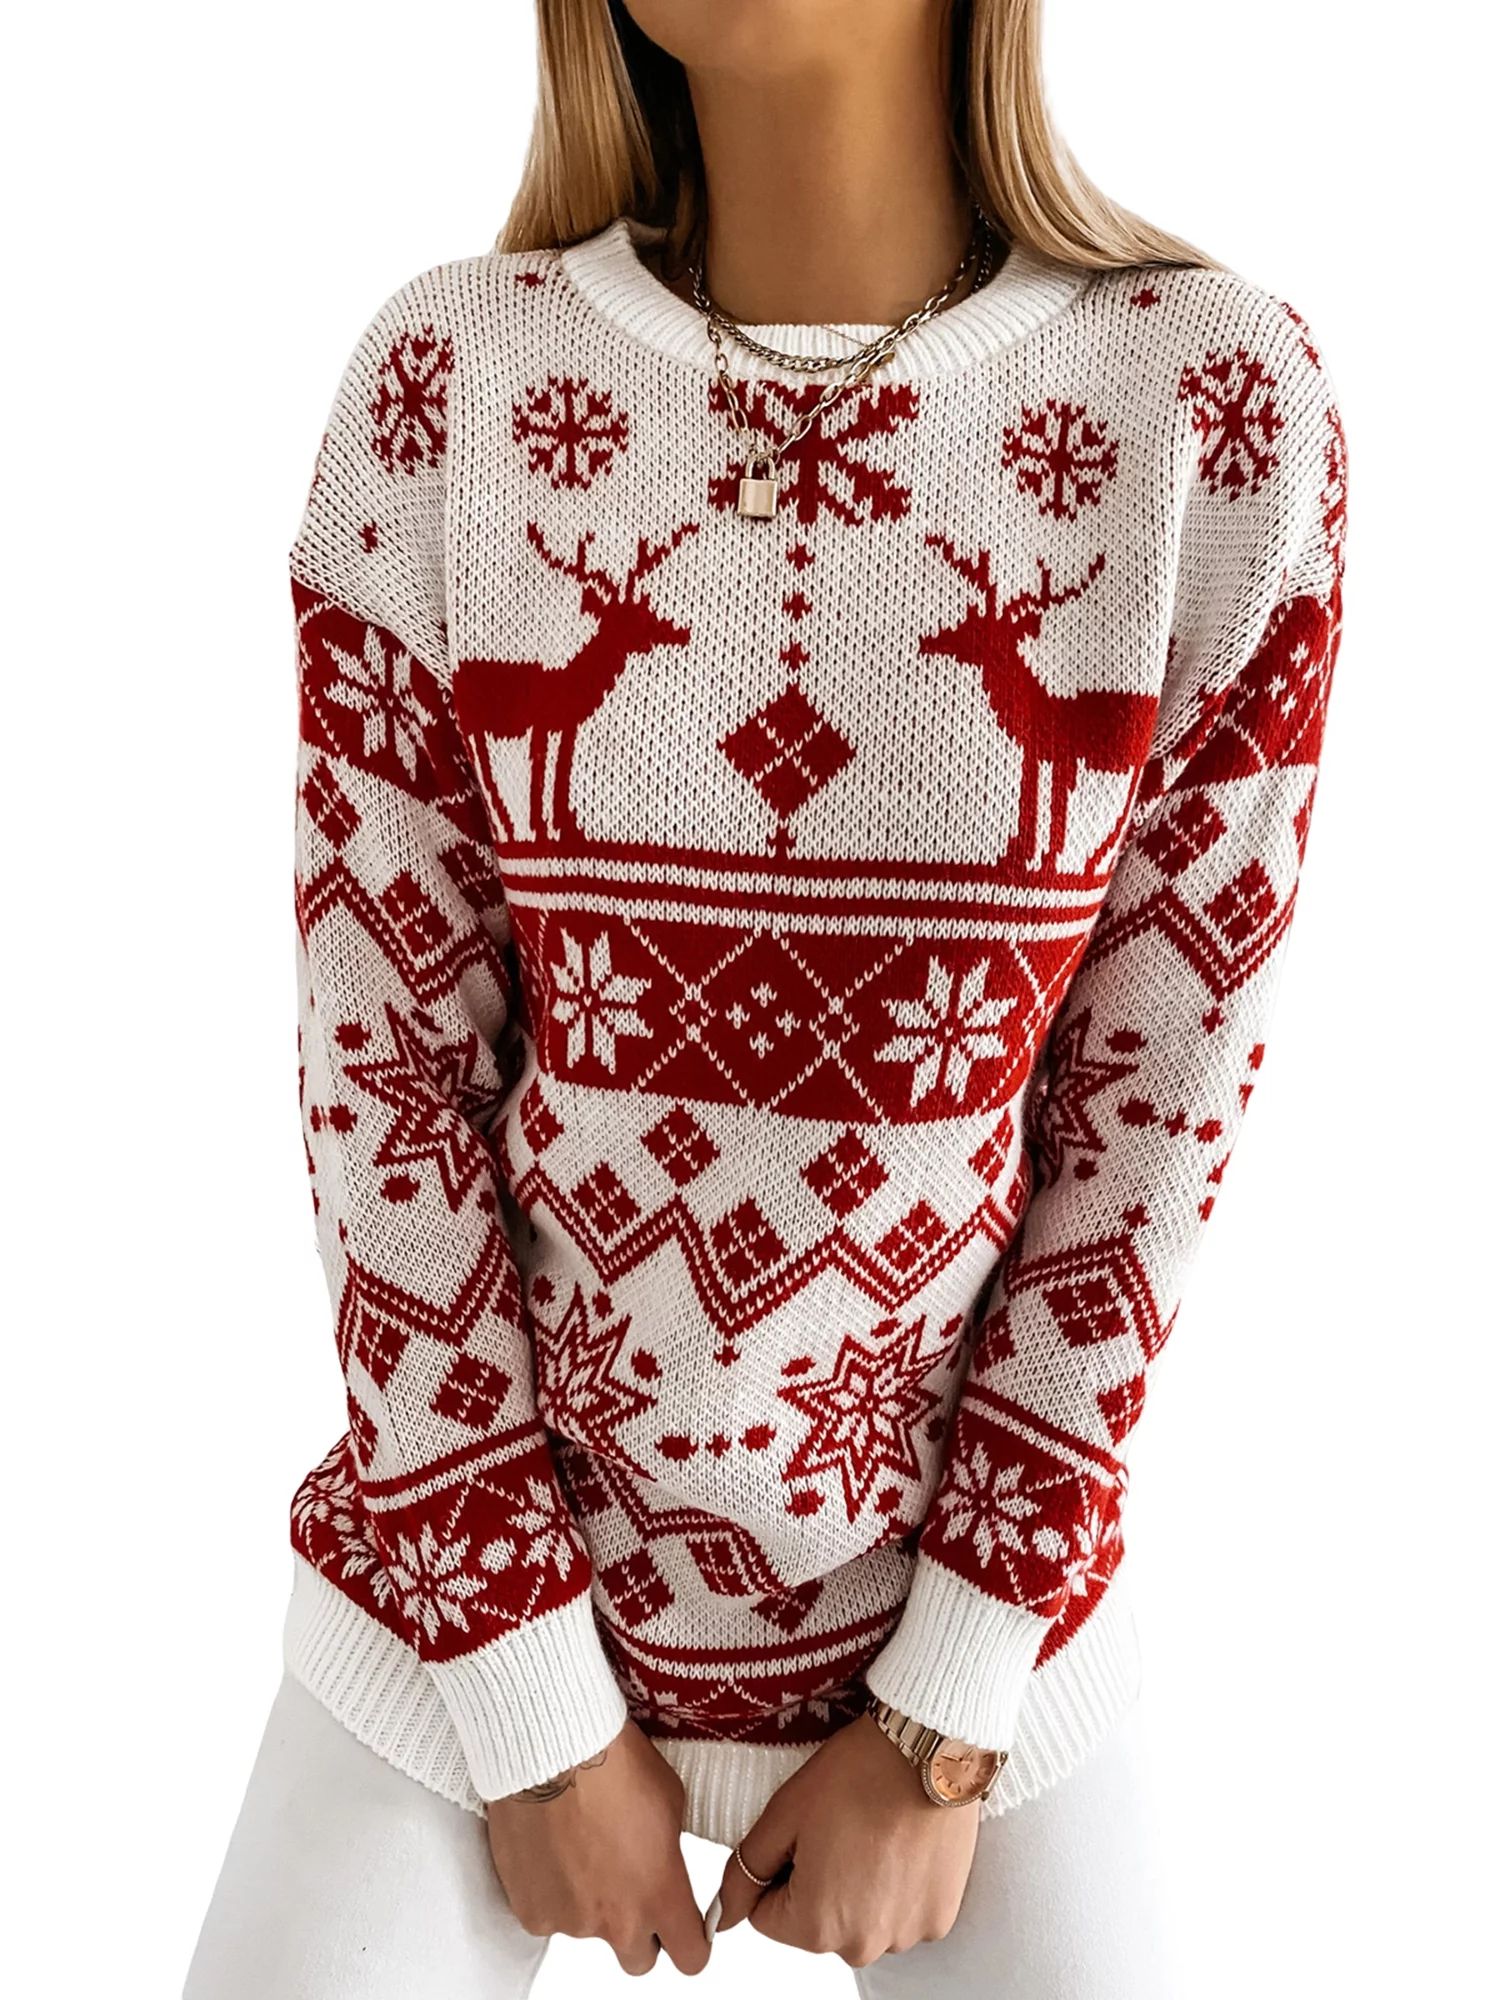 Sunisery Ugly Christmas Sweater for Women Elk Pattern Knitted Crewneck Pullover Tops Long Sleeve ... | Walmart (US)